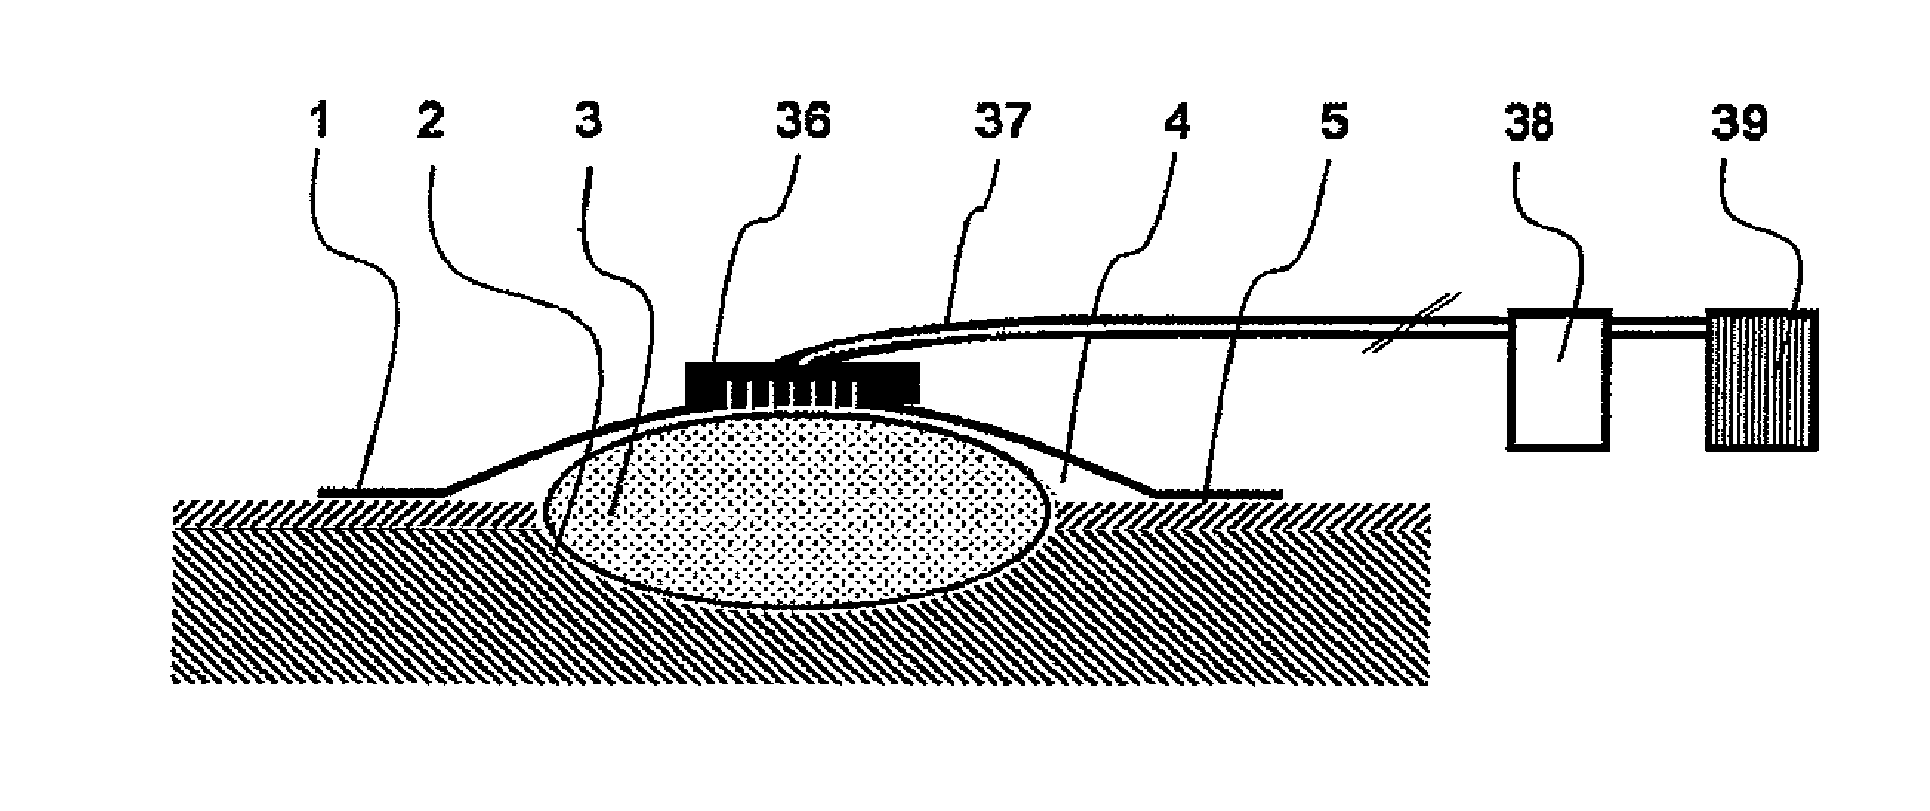 Method for vacuum therapy of wounds